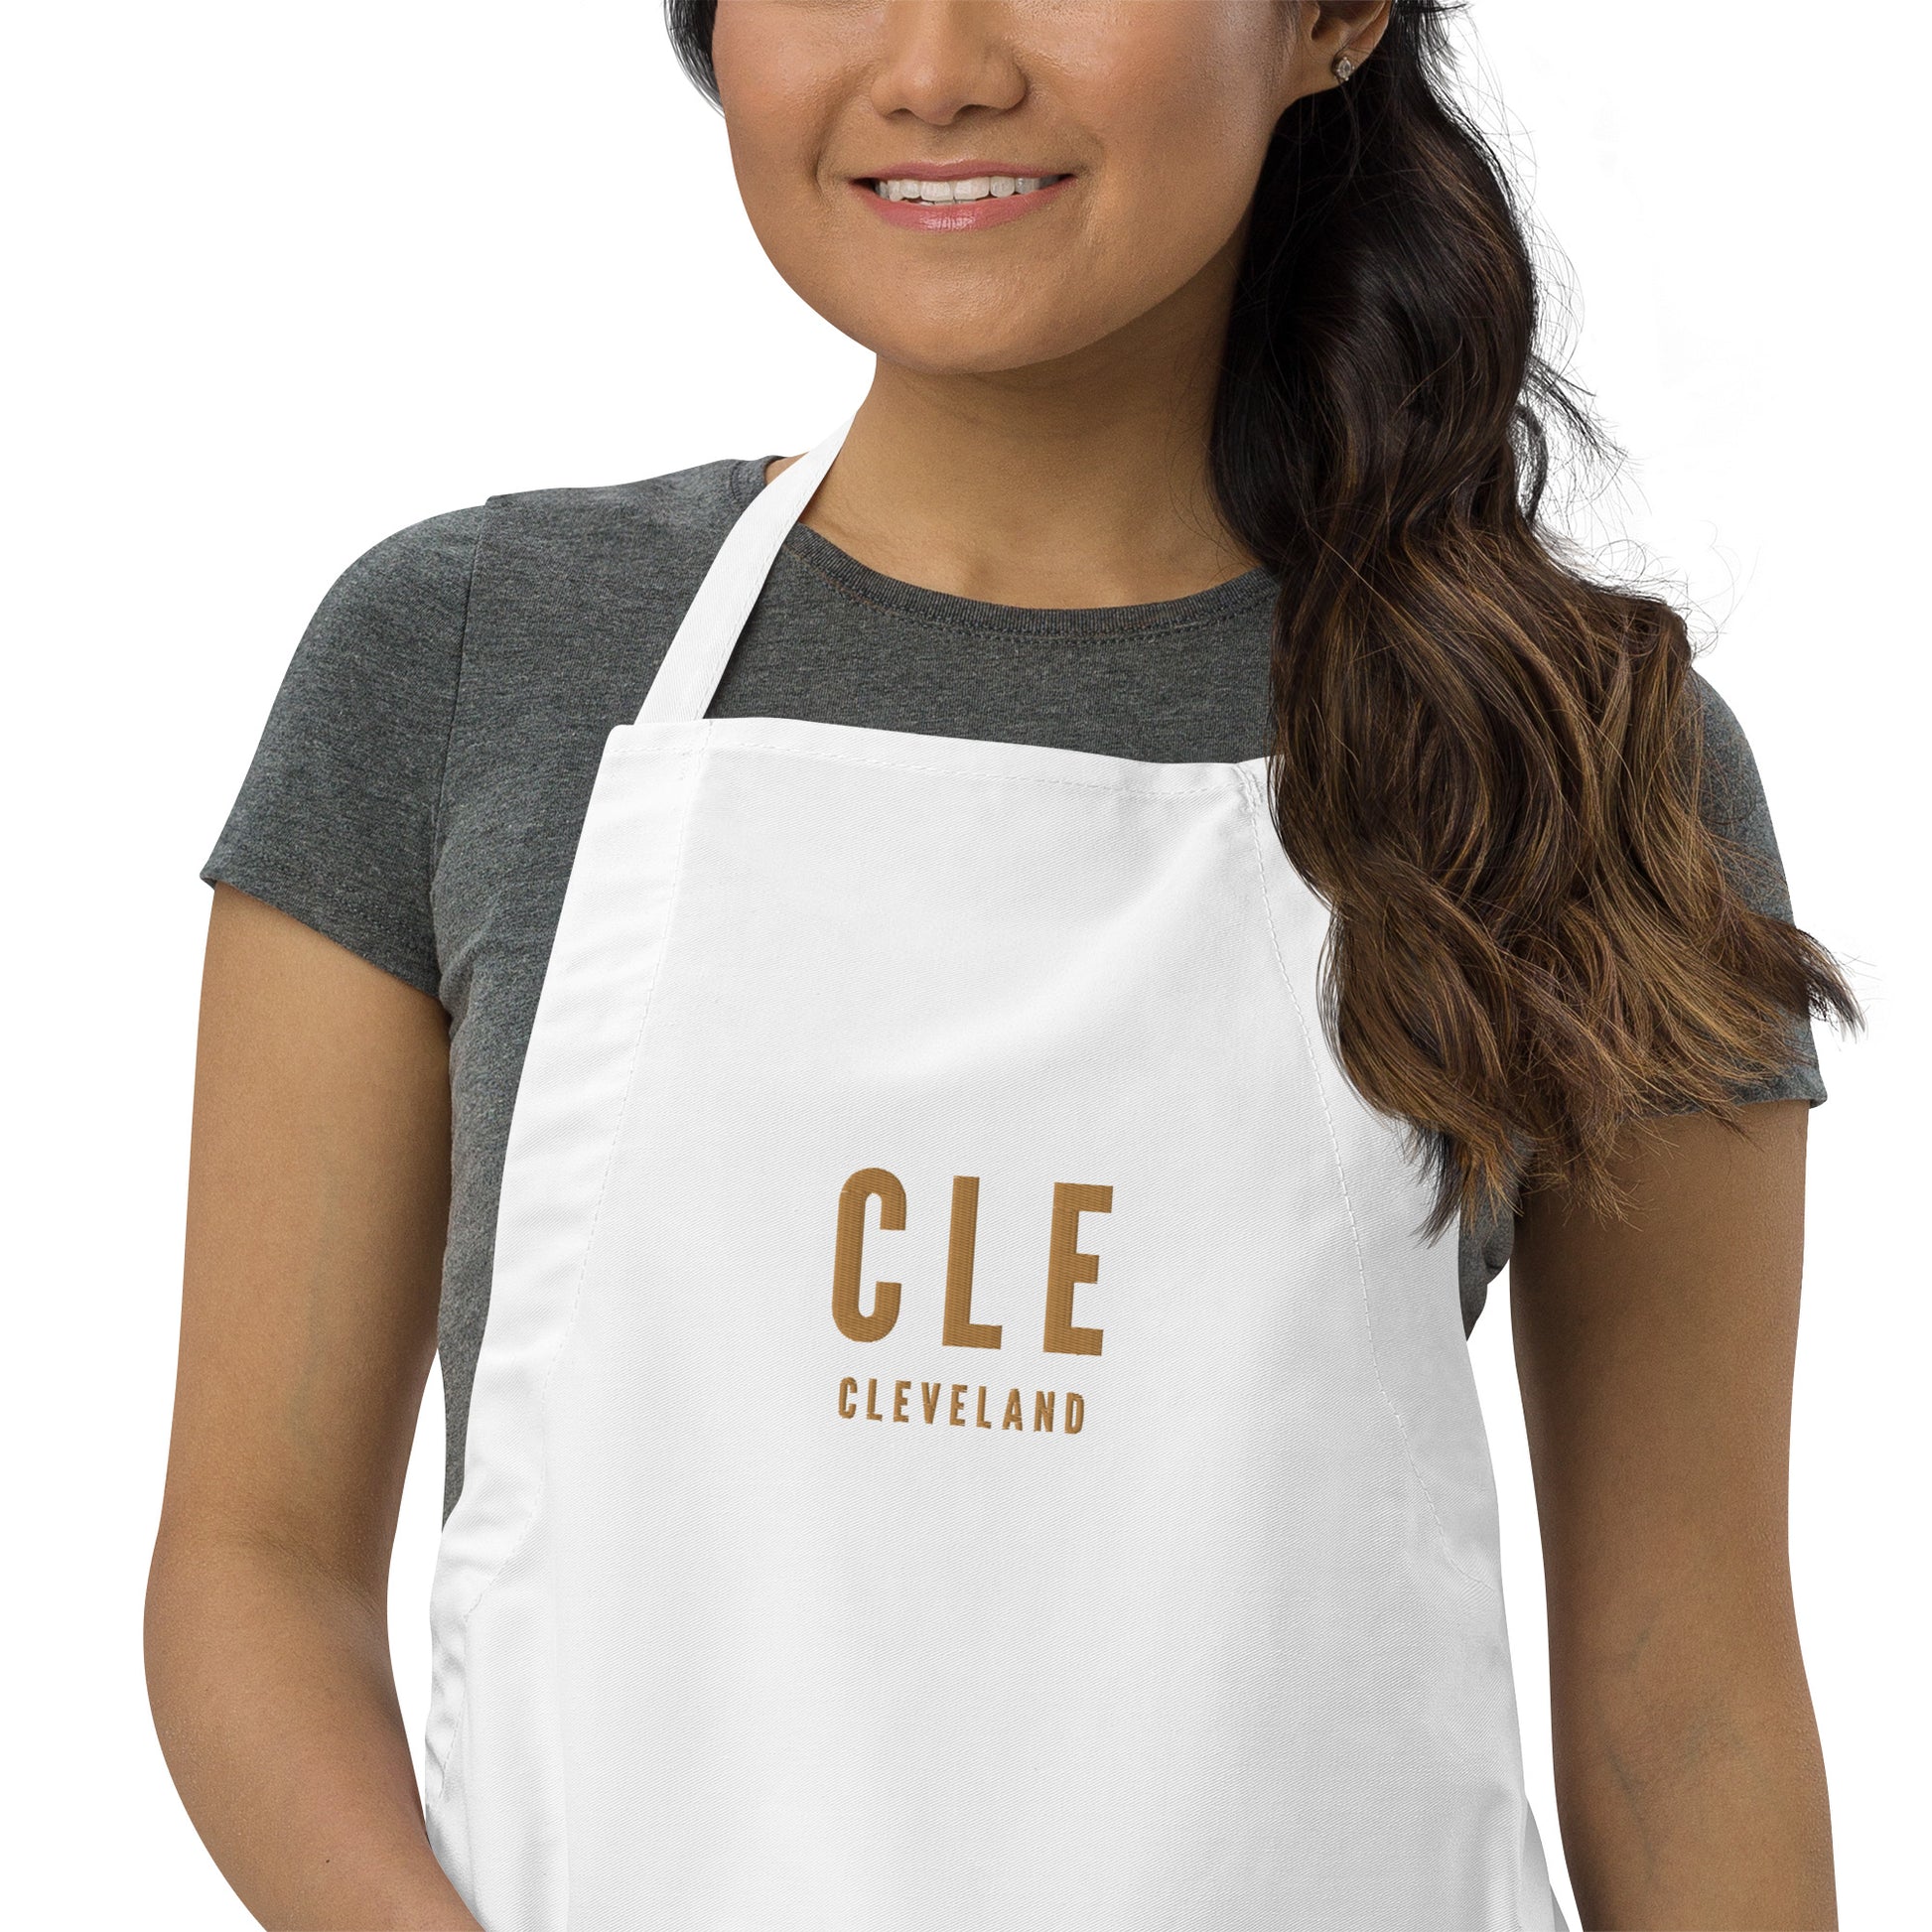 City Embroidered Apron - Old Gold • CLE Cleveland • YHM Designs - Image 08